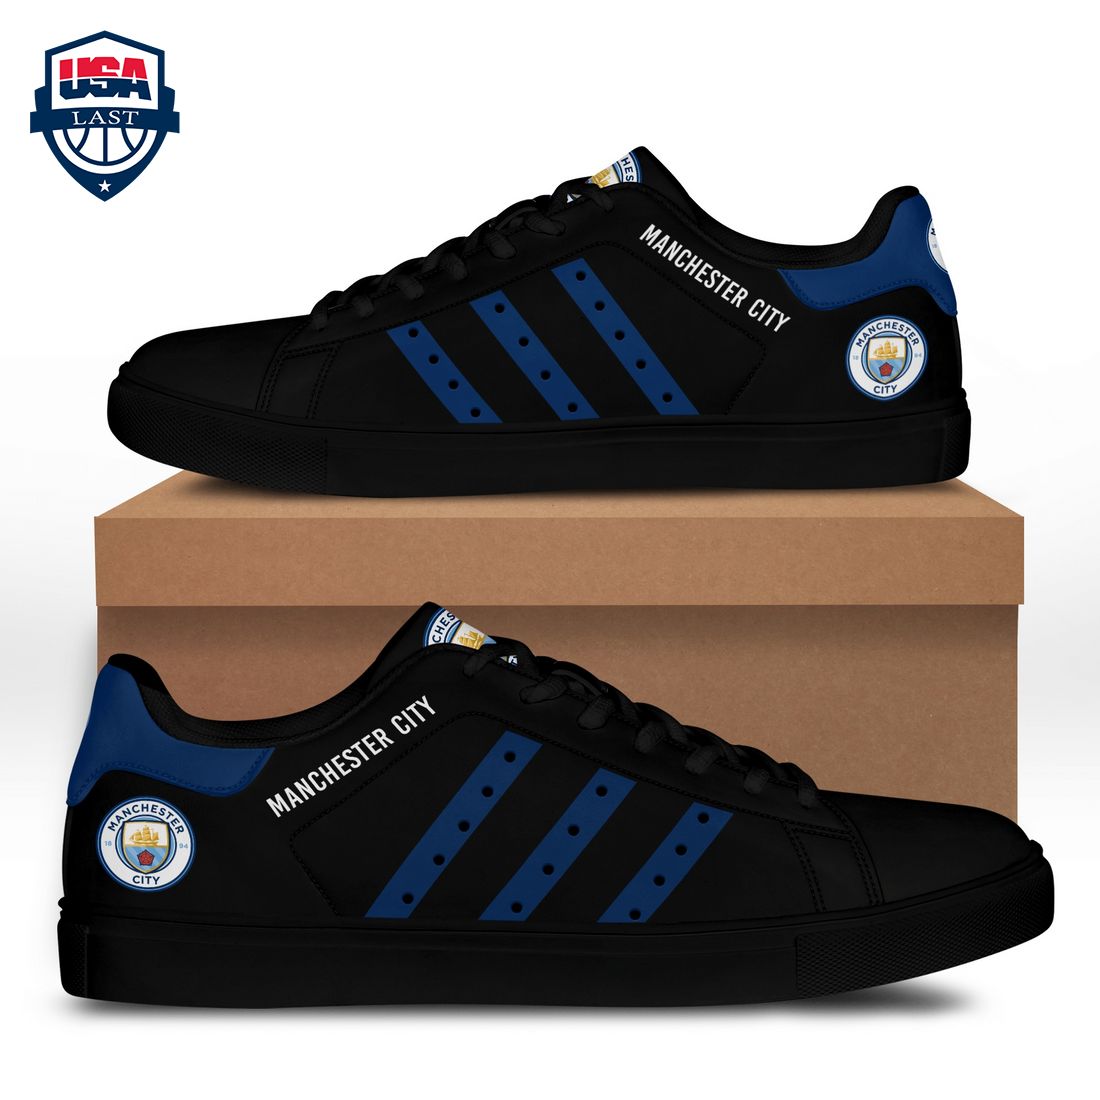 manchester-city-fc-navy-stripes-style-1-stan-smith-low-top-shoes-1-j5NY6.jpg